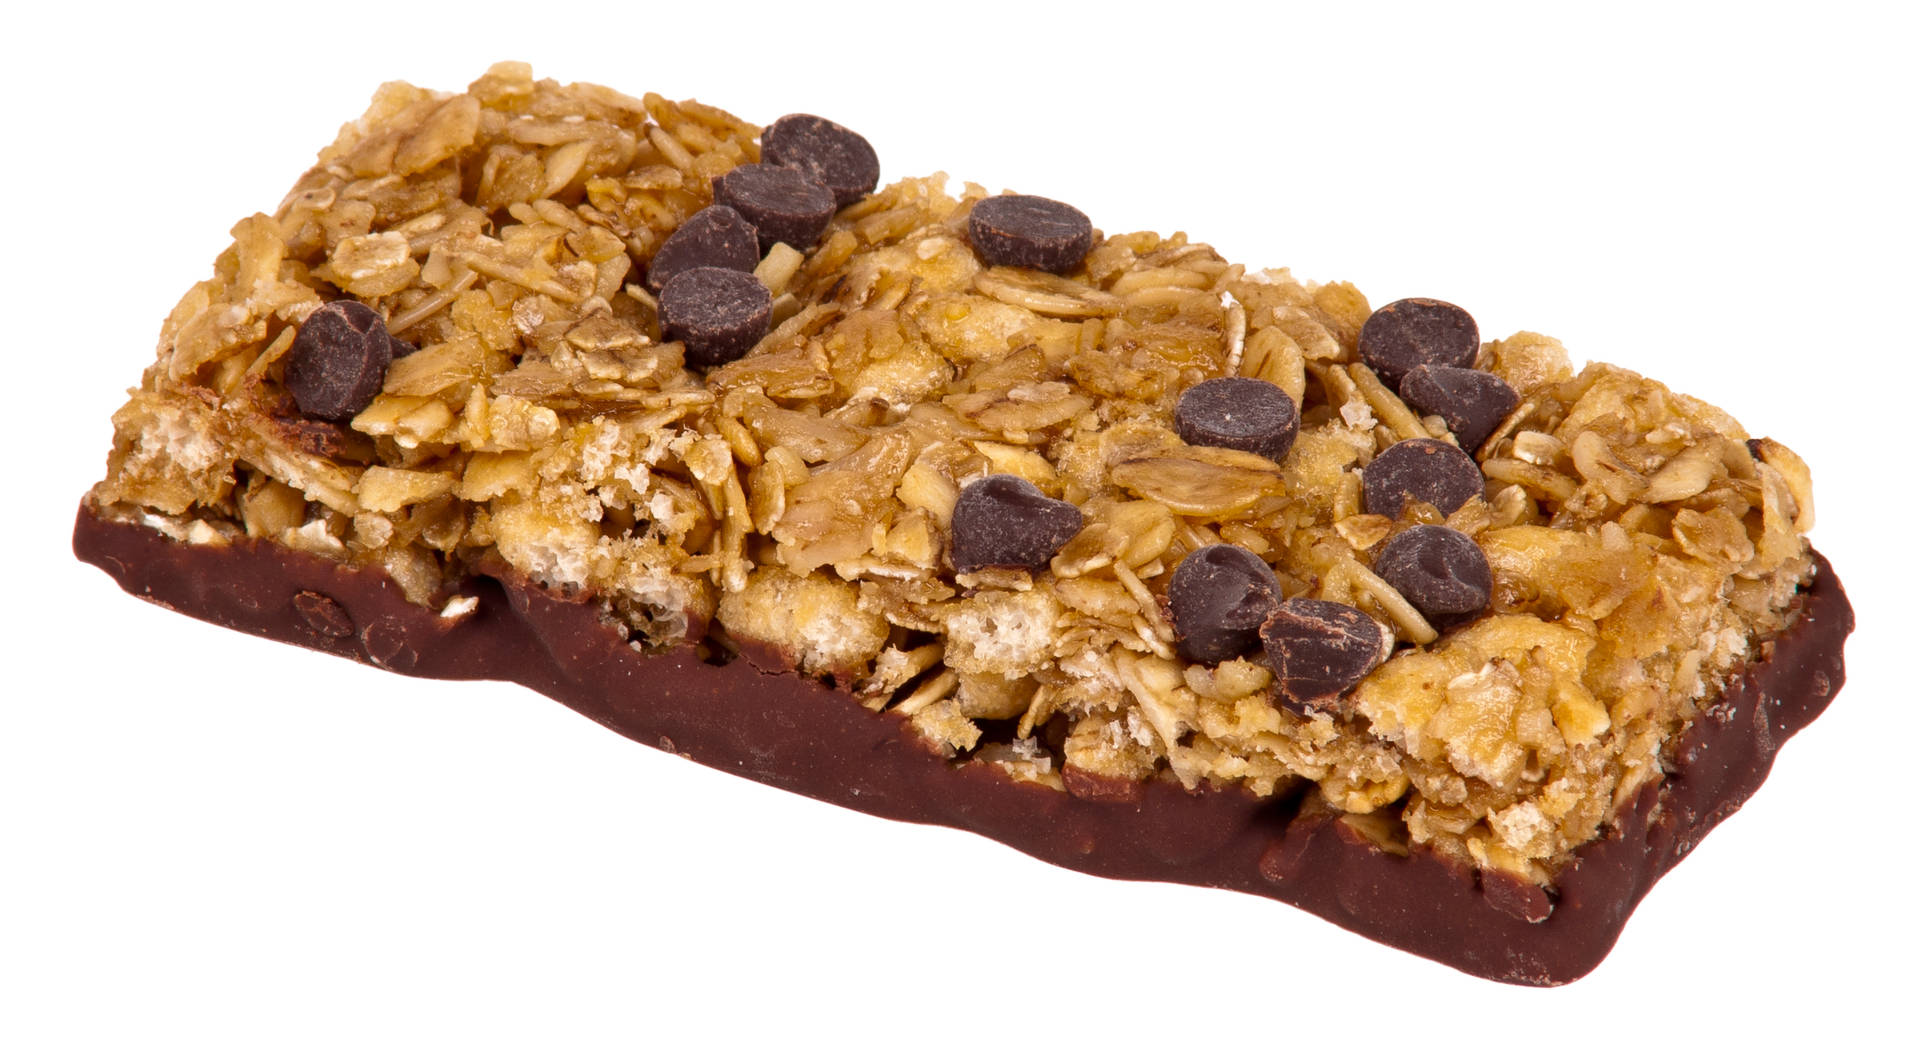 Delicious Chewy Chocolate Granola Bar Wallpaper